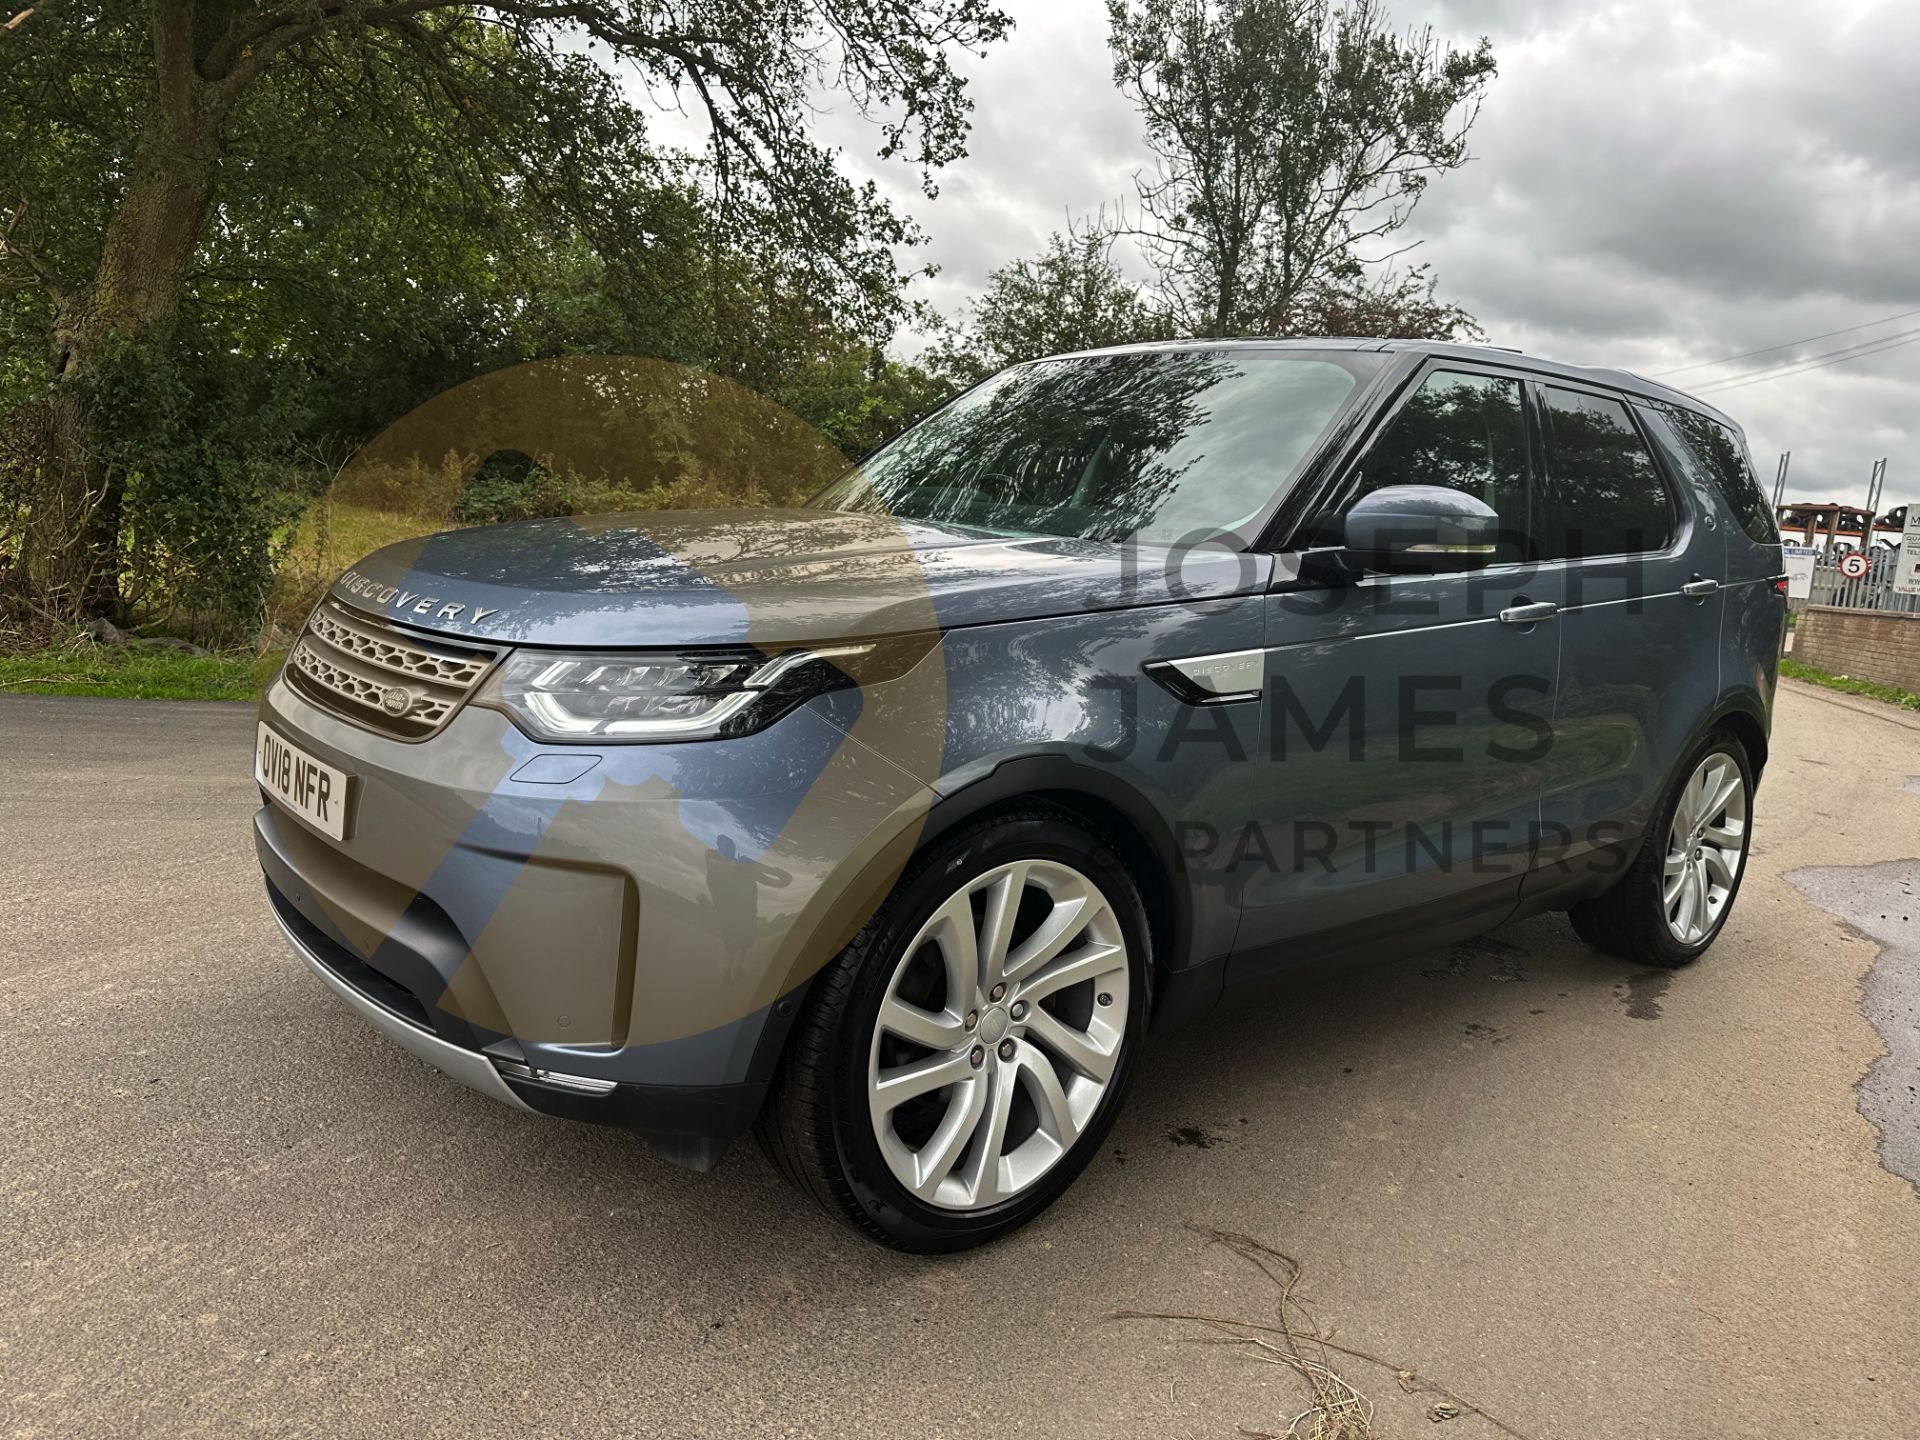 (ON SALE) LAND ROVER DISCOVERY 5 *HSE LUXURY* 7 SEATER SUV (2018 - FACELIFT MODEL) (LOW MILEAGE) - Image 6 of 66